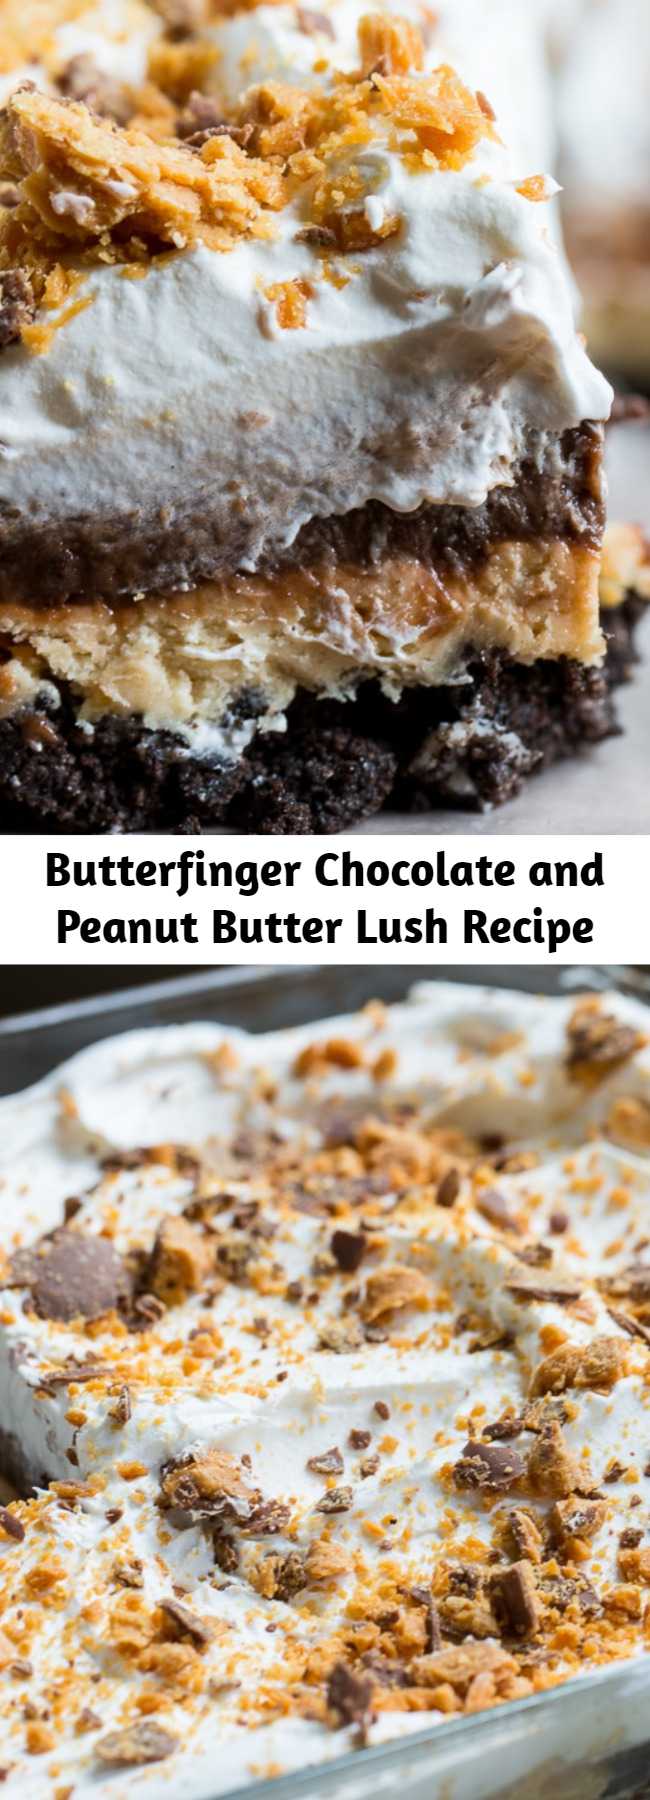 Butterfinger Chocolate and Peanut Butter Lush Recipe - So many delicious, creamy layers and the buttery crunch of Butterfinger candy. You won't find a more delicious dessert than this cool and creamy Butterfinger Chocolate and Peanut Butter Lush. Layer after layer of heaven!